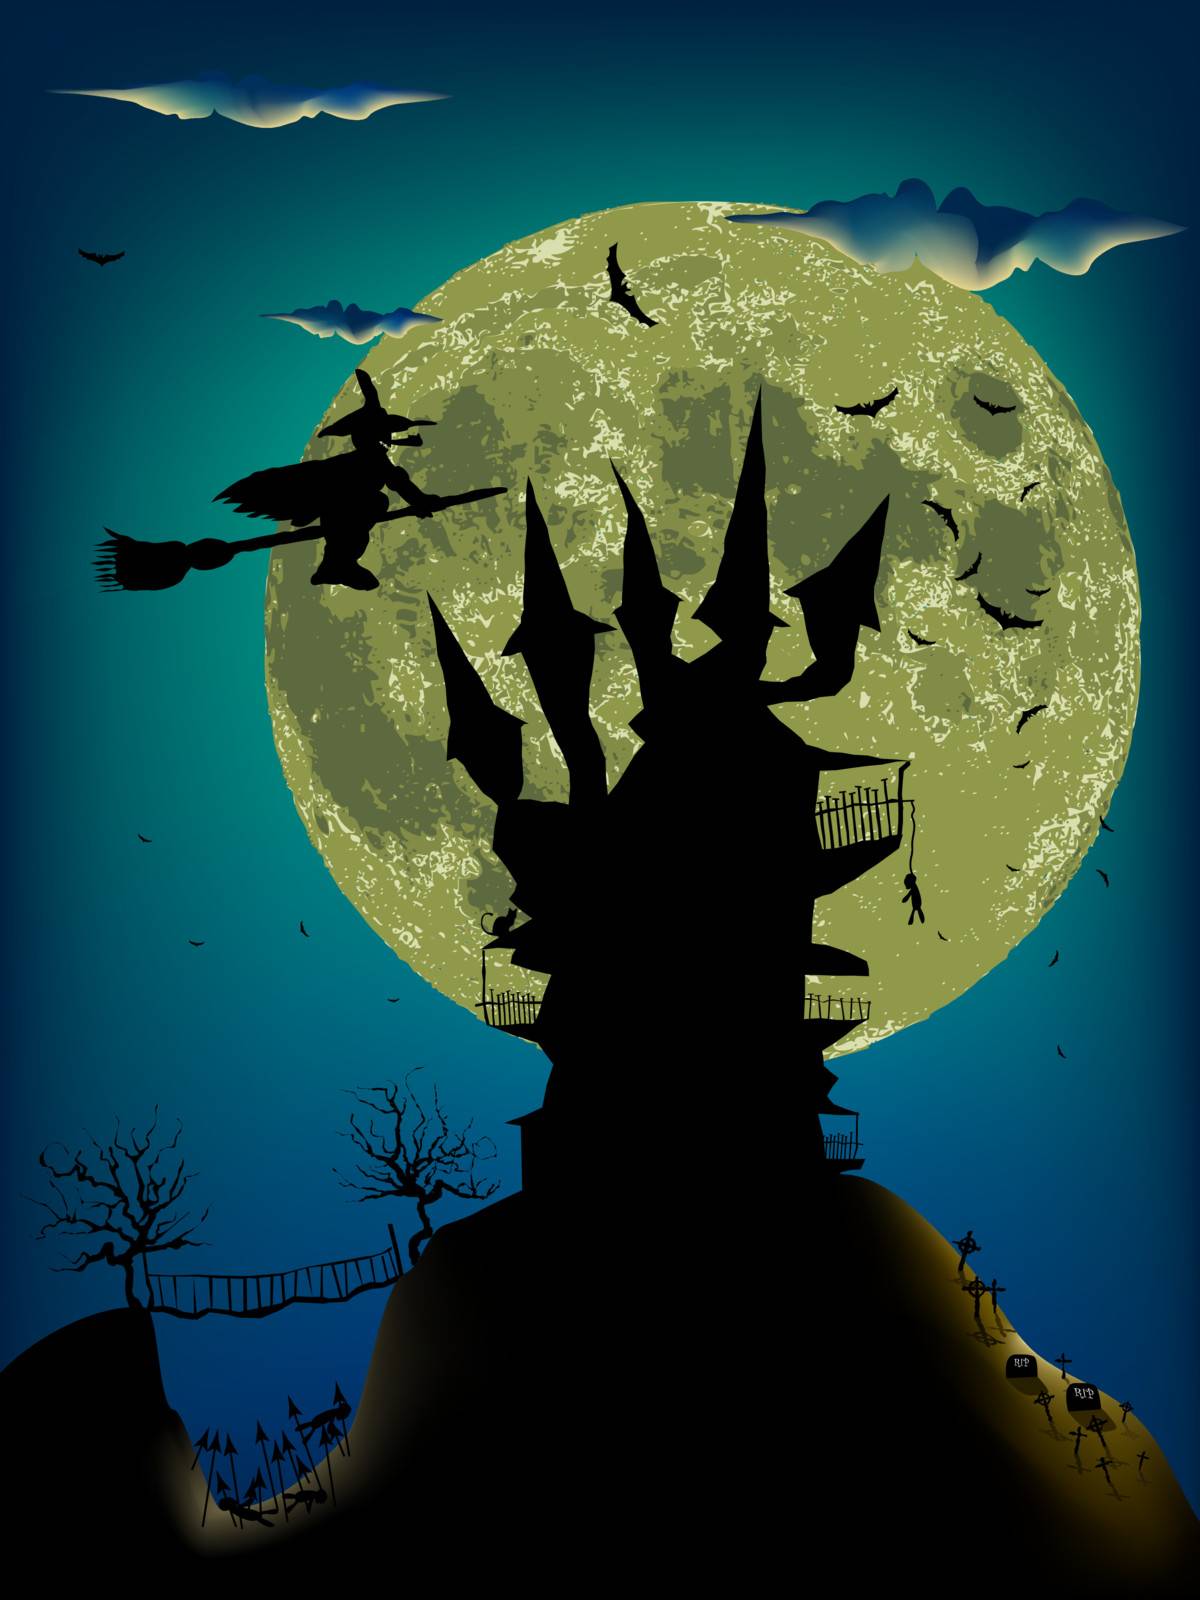 Halloween night portrait poster. EPS 8 vector file included